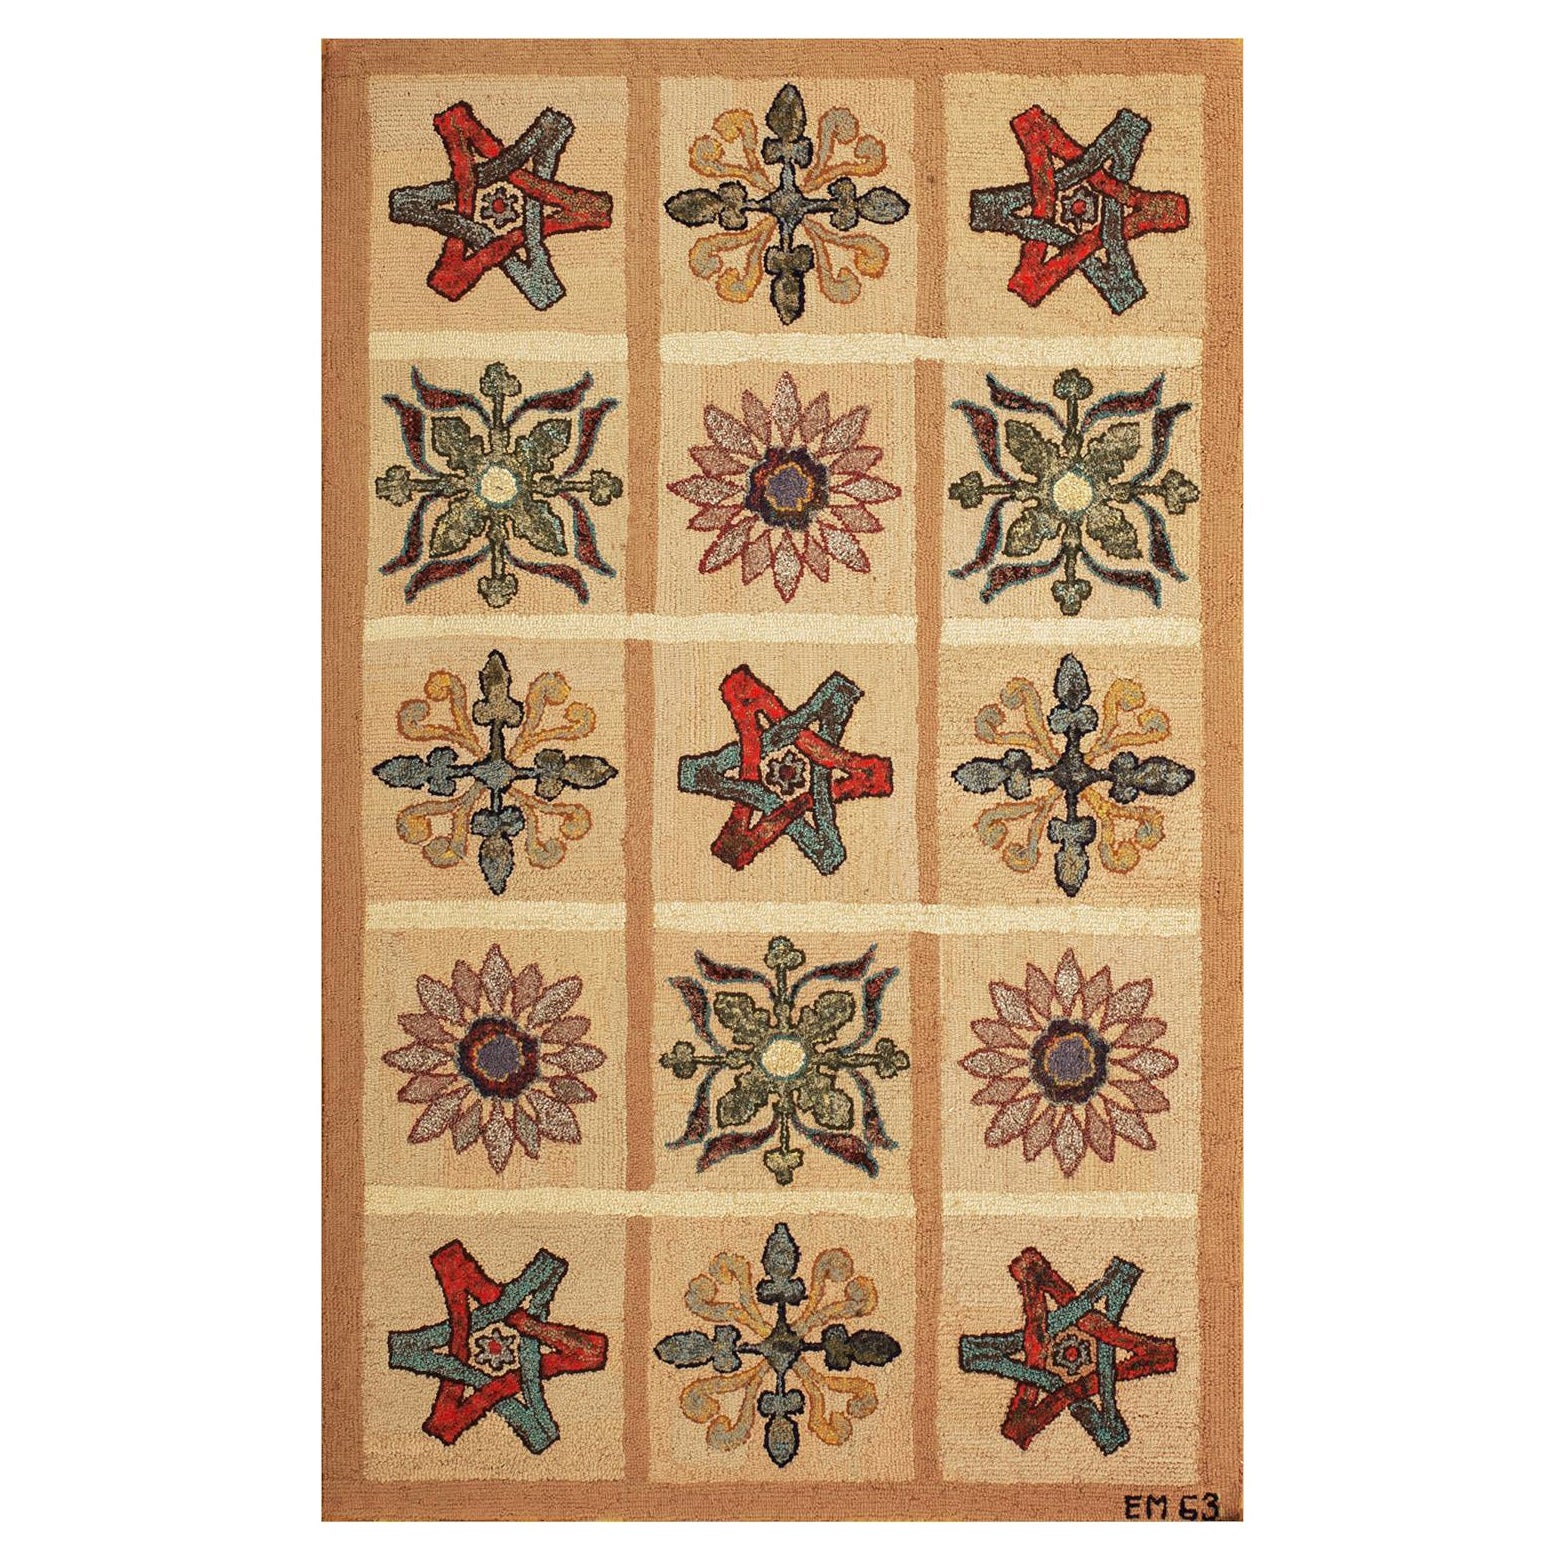 Mid 20th Century American Hooked Rug ( 2' 8" x 4' 2" - 82 x 127 cm ) For Sale